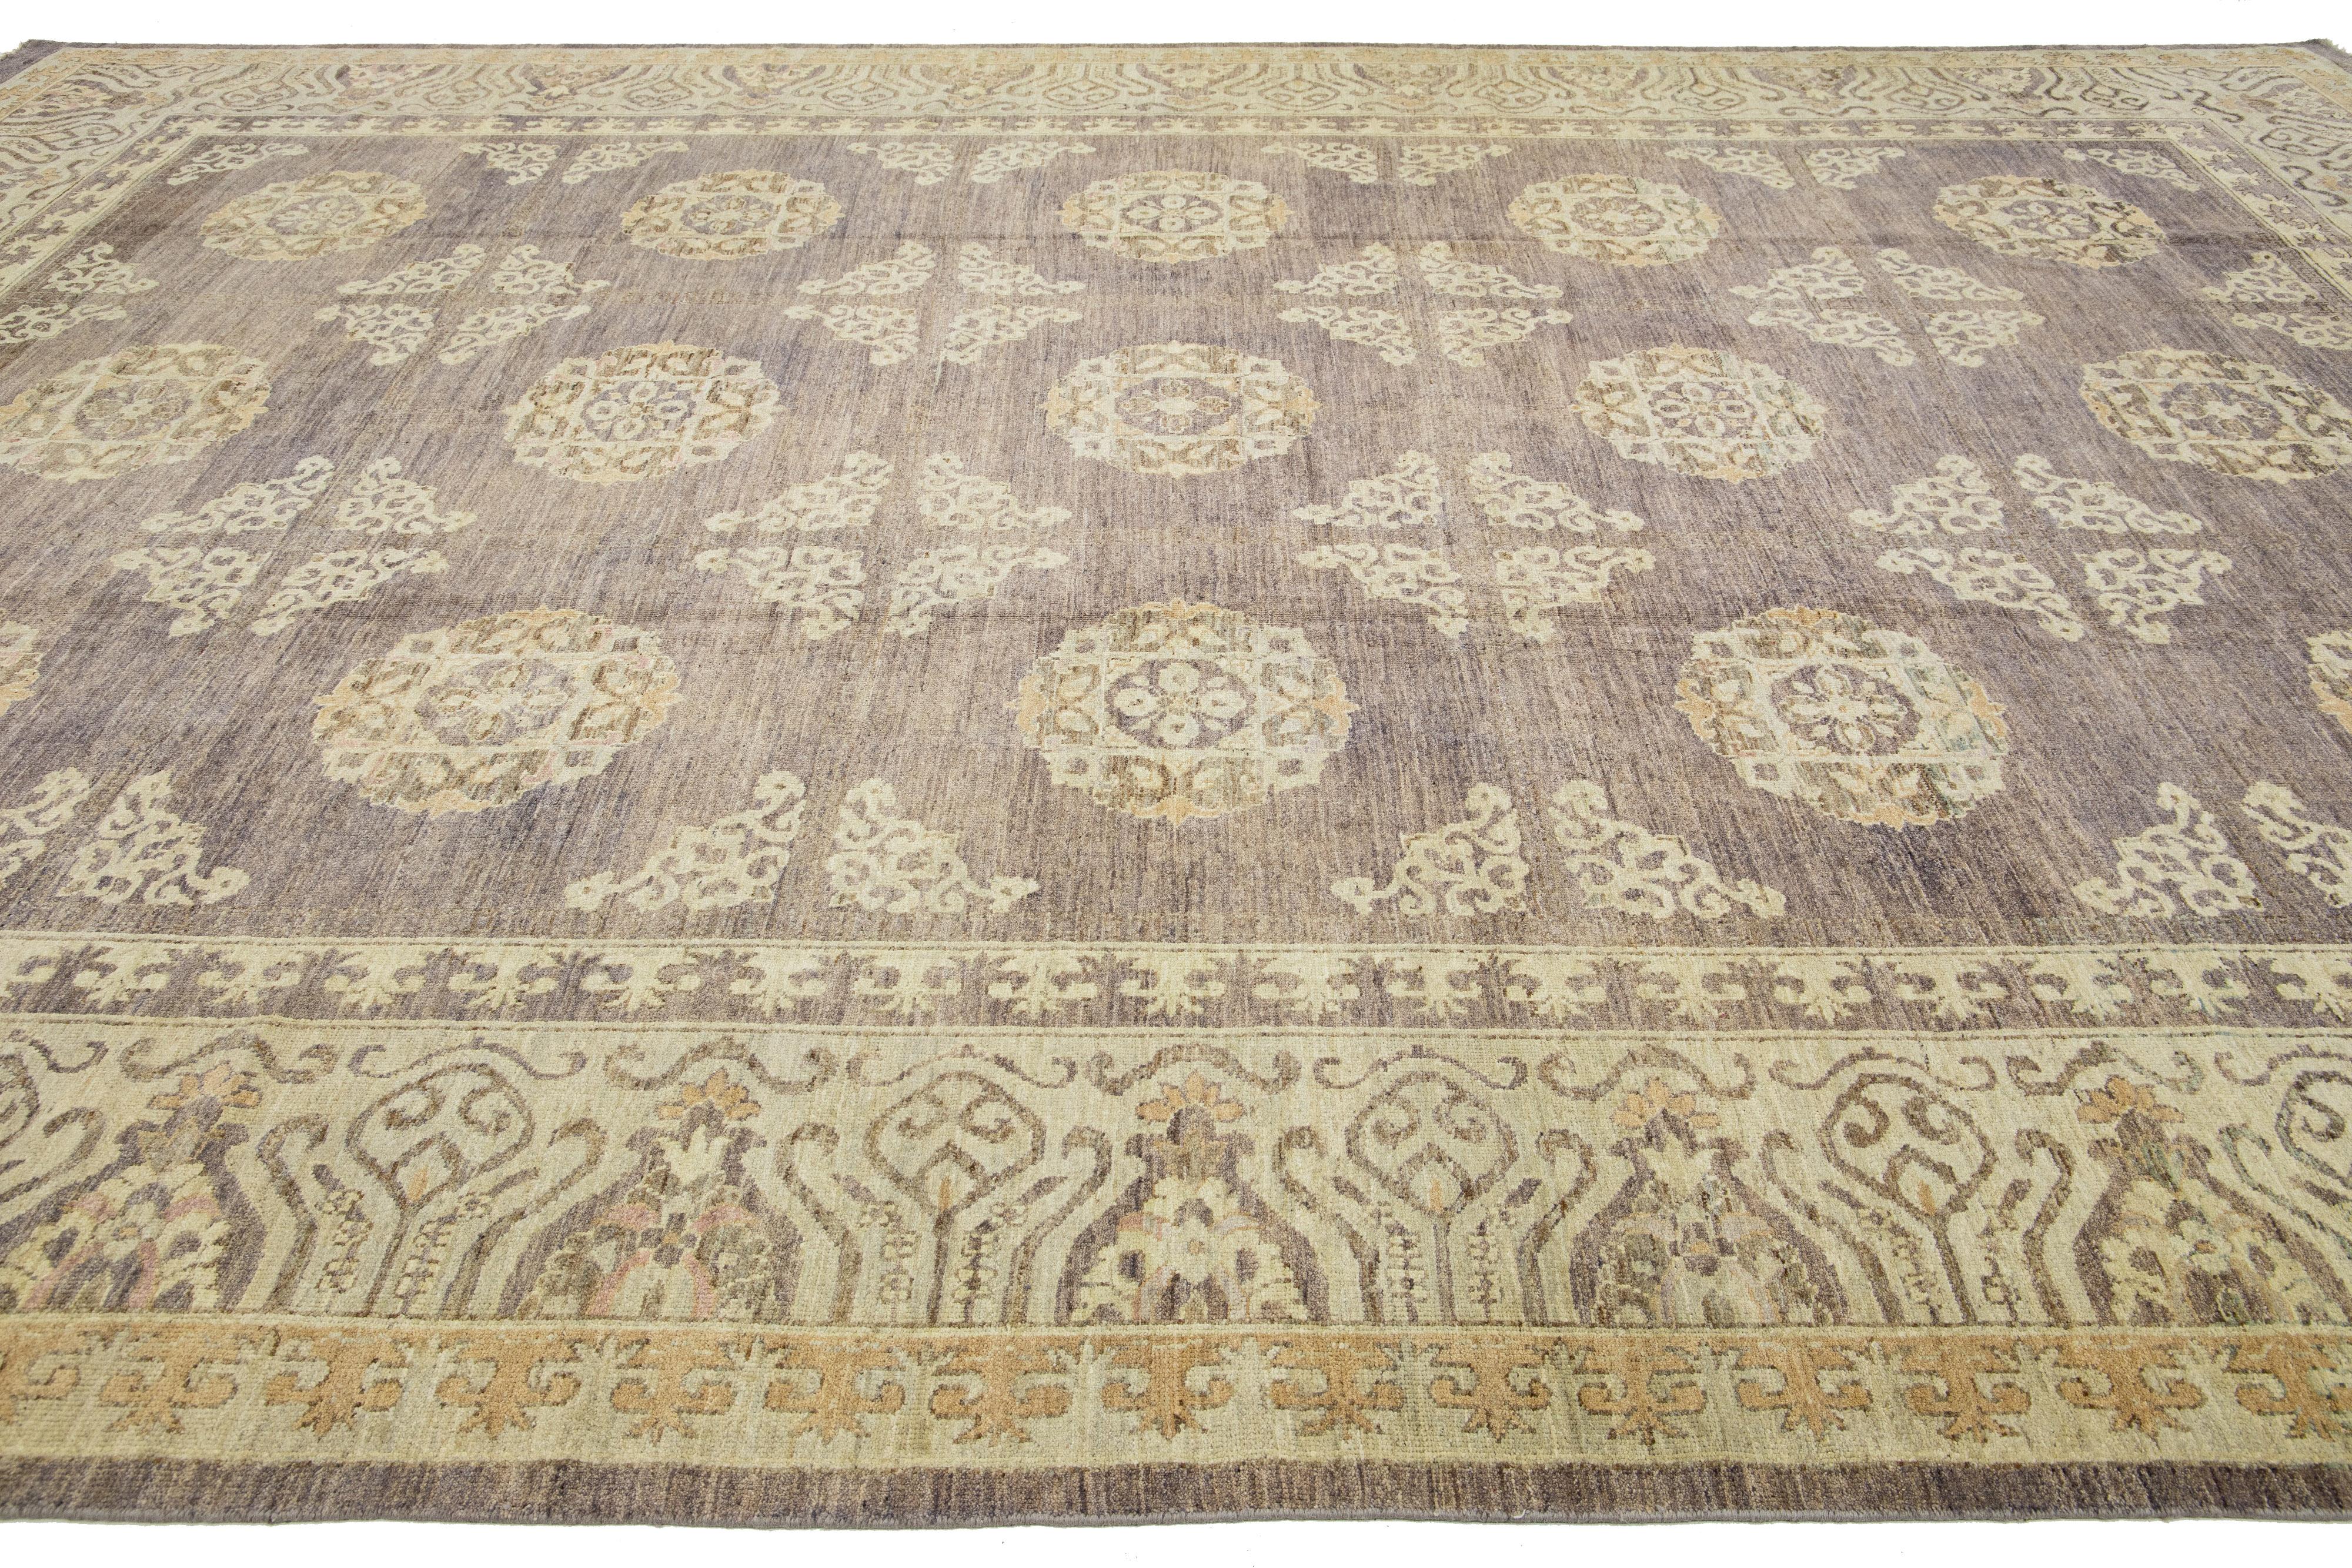 Allover Designed Modern Khotan Wool Rug Handmade In Brown and Blue Field Colors  In New Condition For Sale In Norwalk, CT